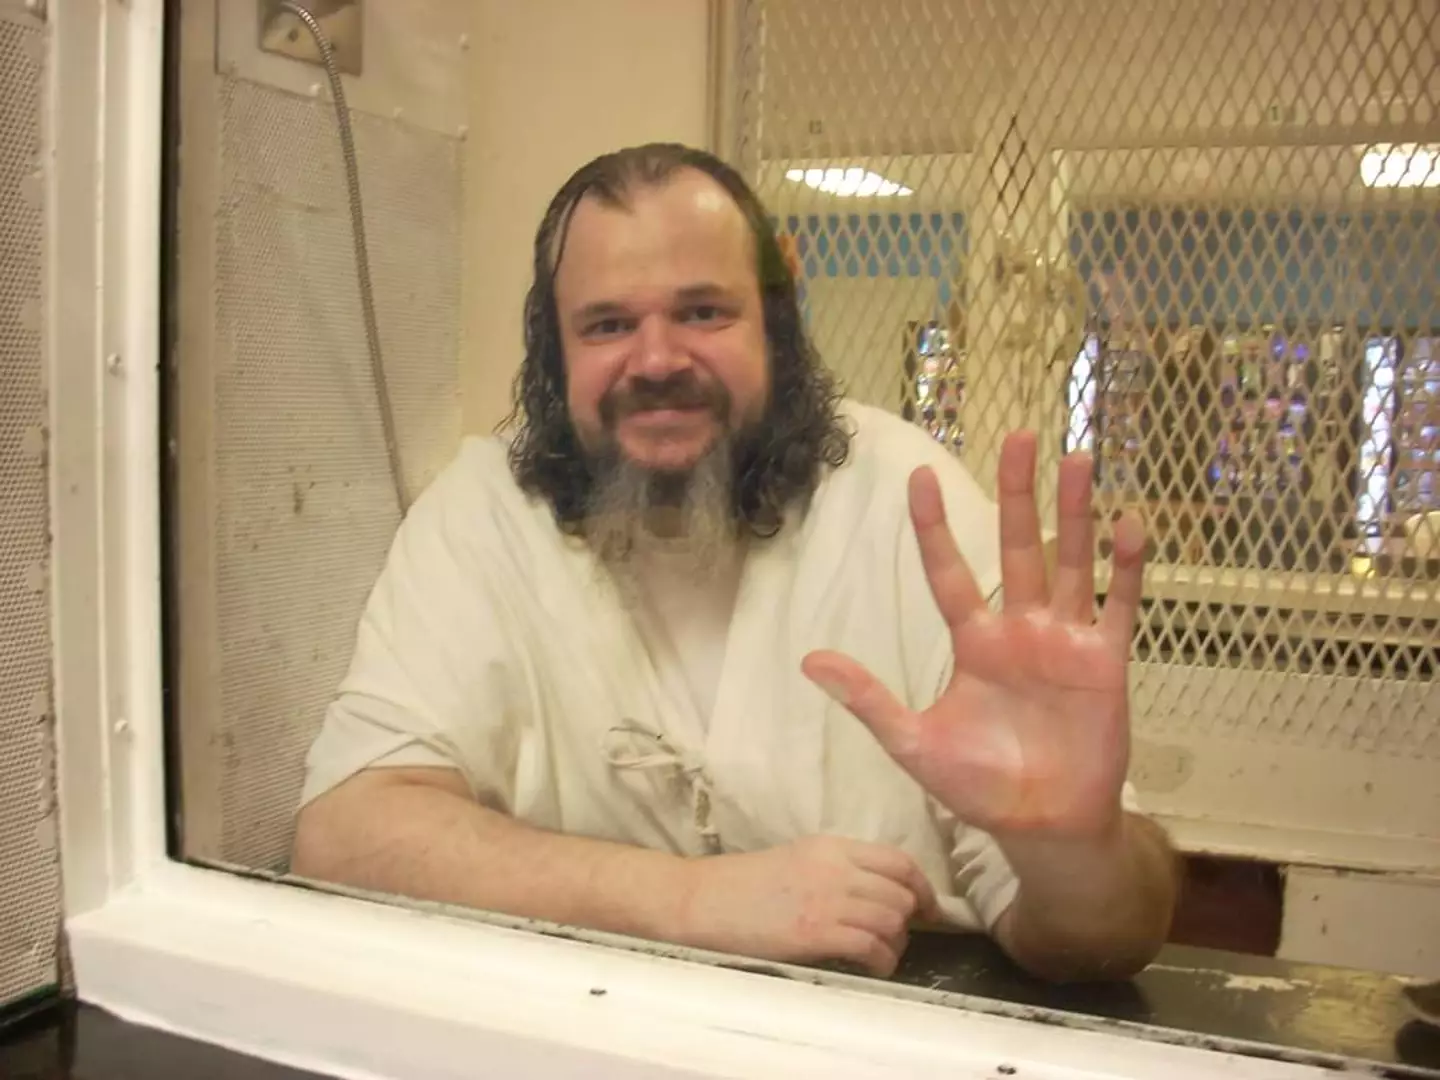 Jeffrey Lee Wood is currently on death row in Texas.